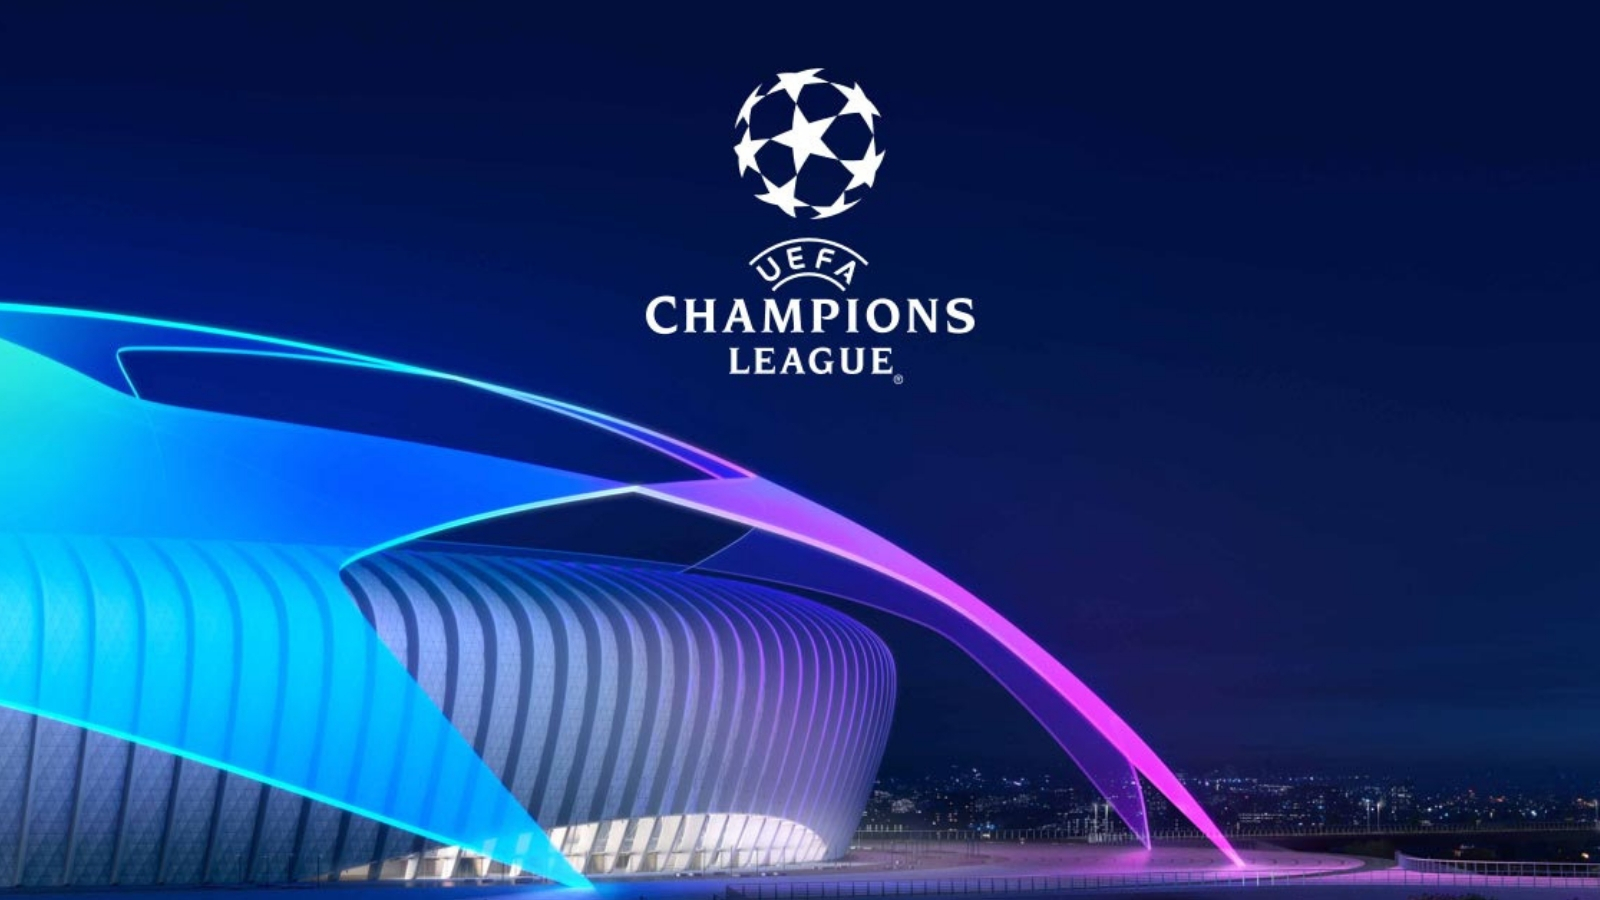 How To Watch Uefa Champions League Online Without Cable Technadu Images, Photos, Reviews